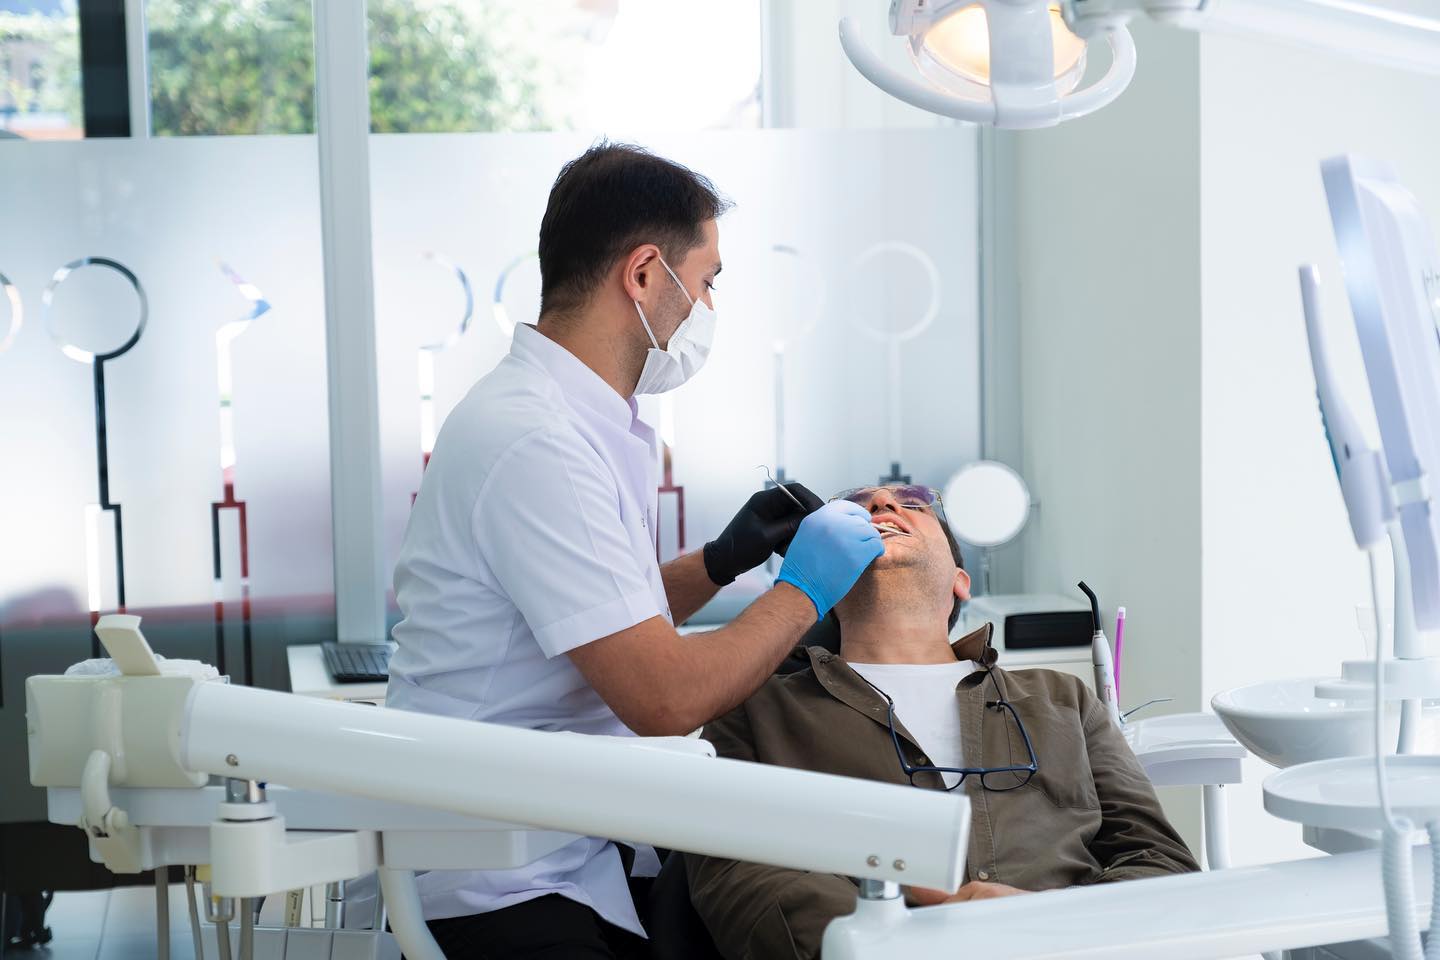 ReDent Istanbul: High-Quality European Dental at Affordable Prices - The Source